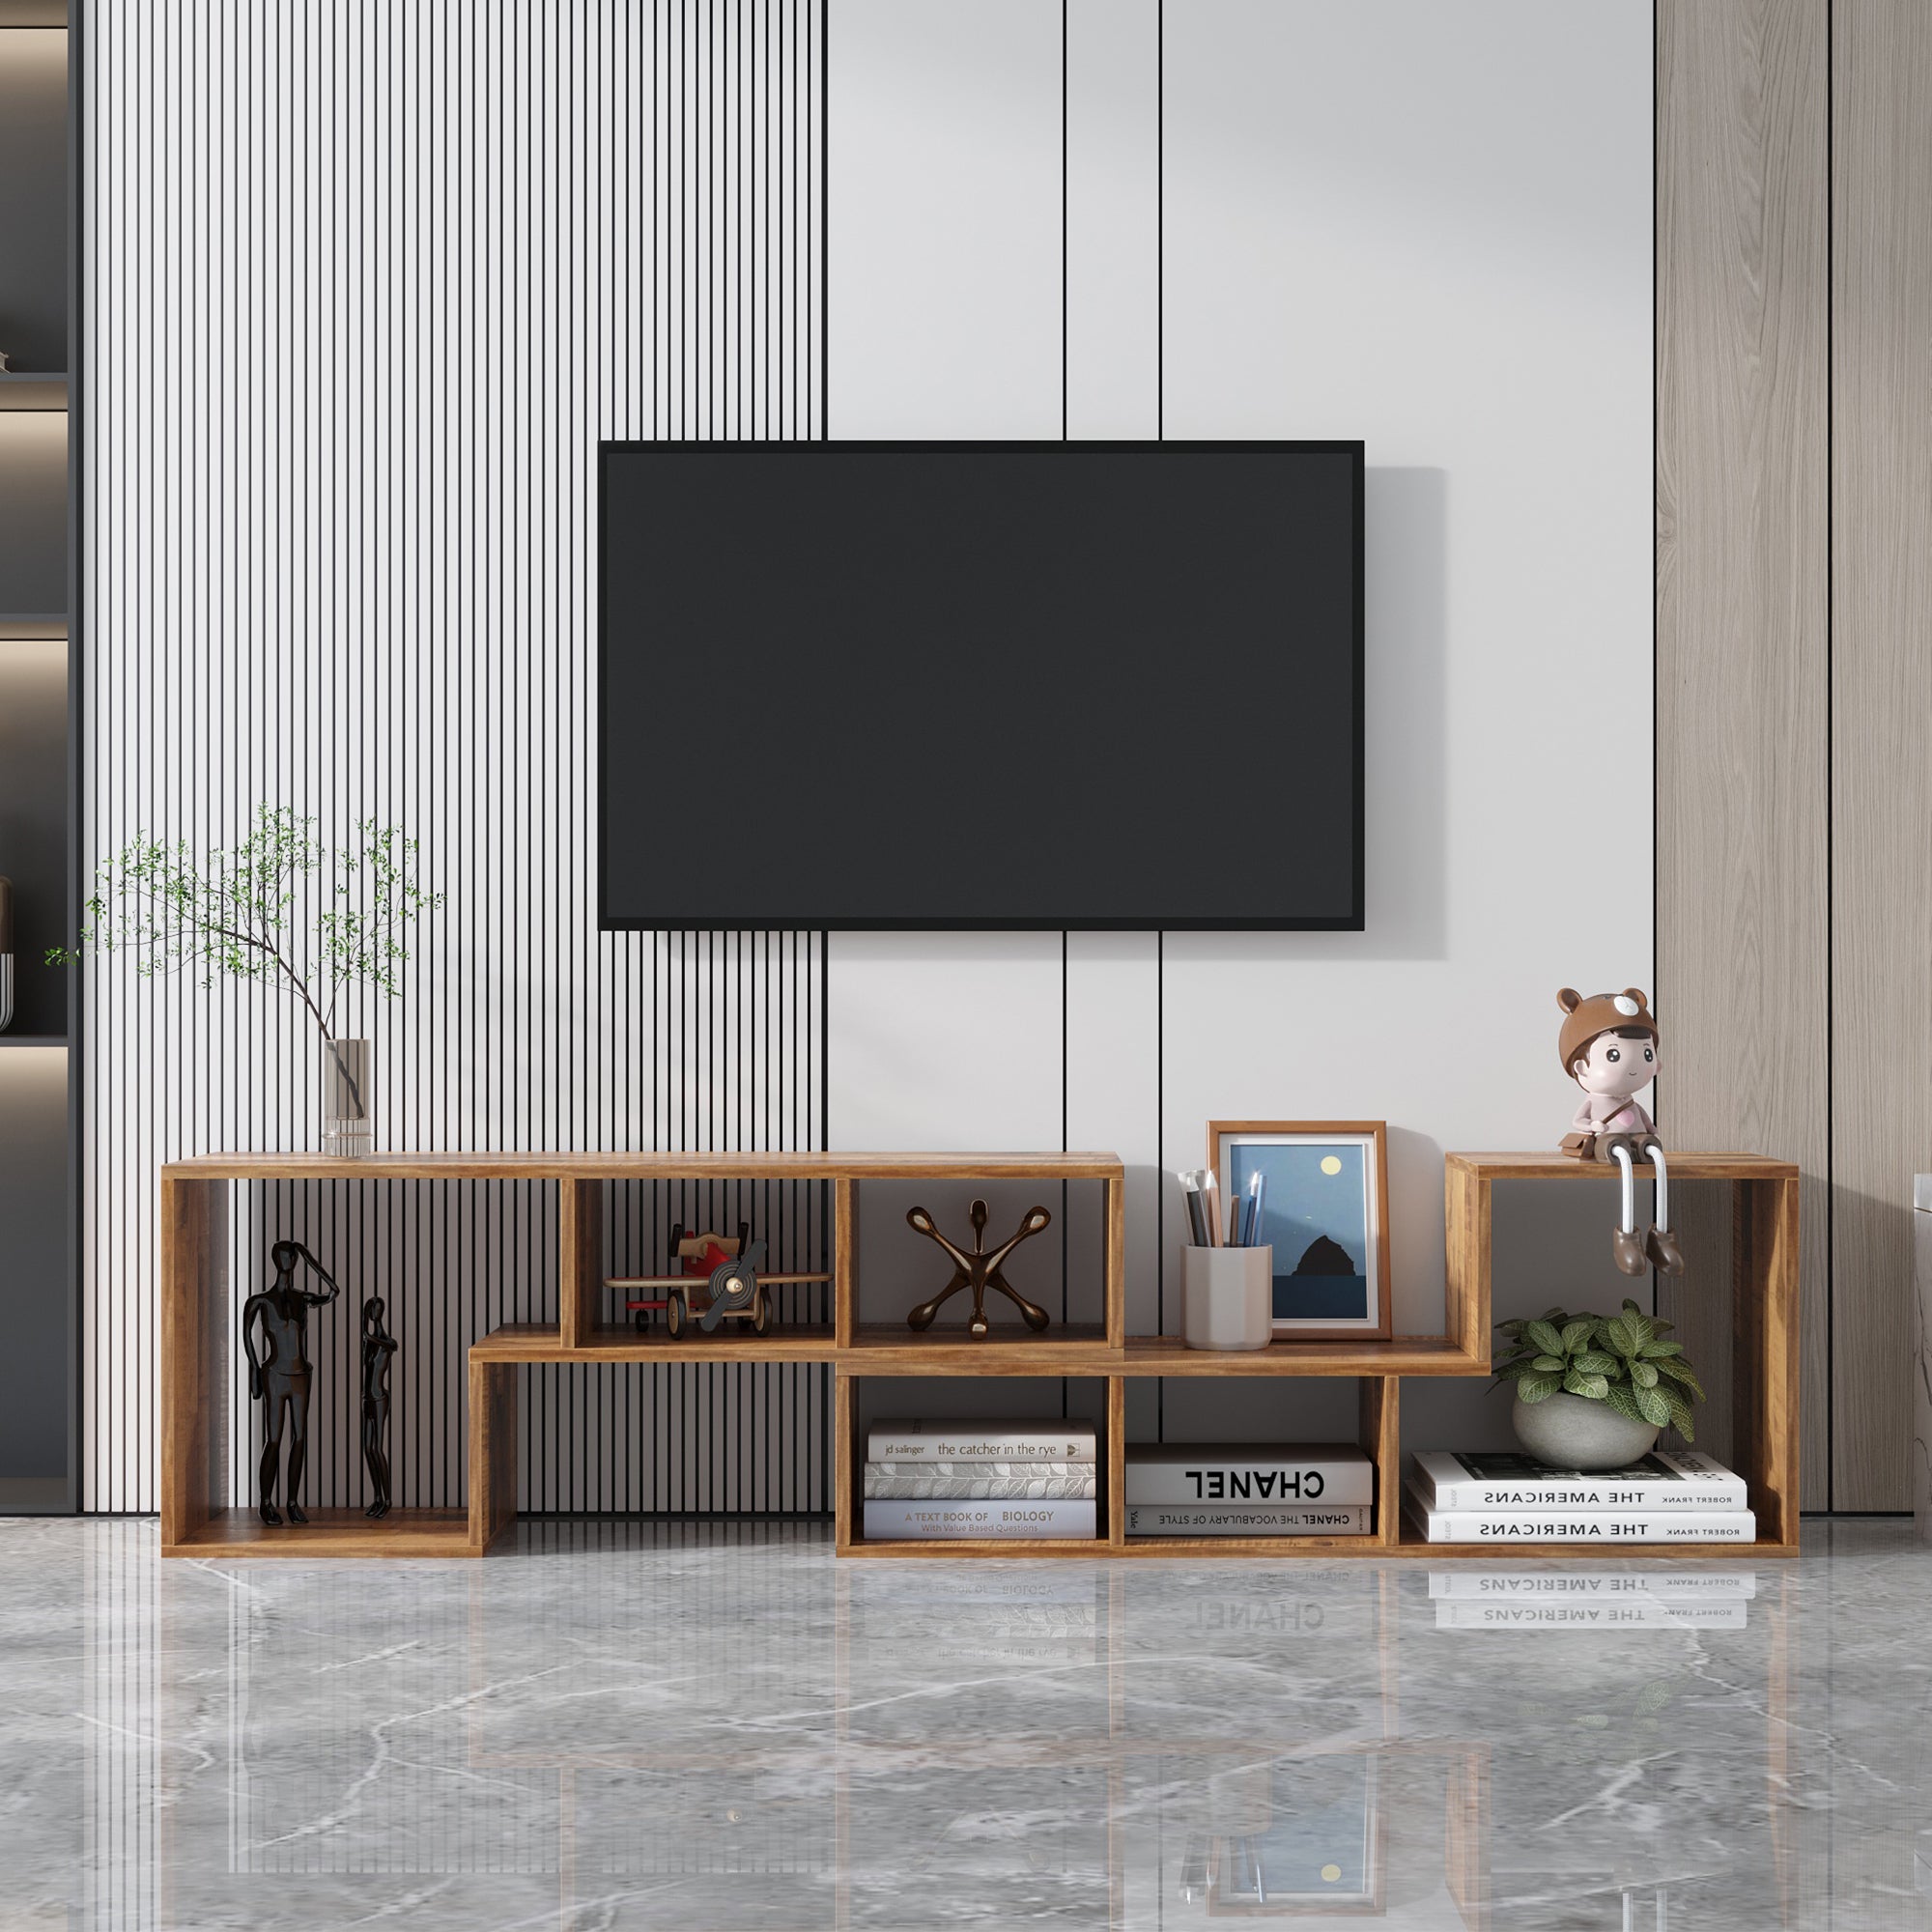 Double L-Shaped TV Stand with Display Shelf & Bookcase, Oak